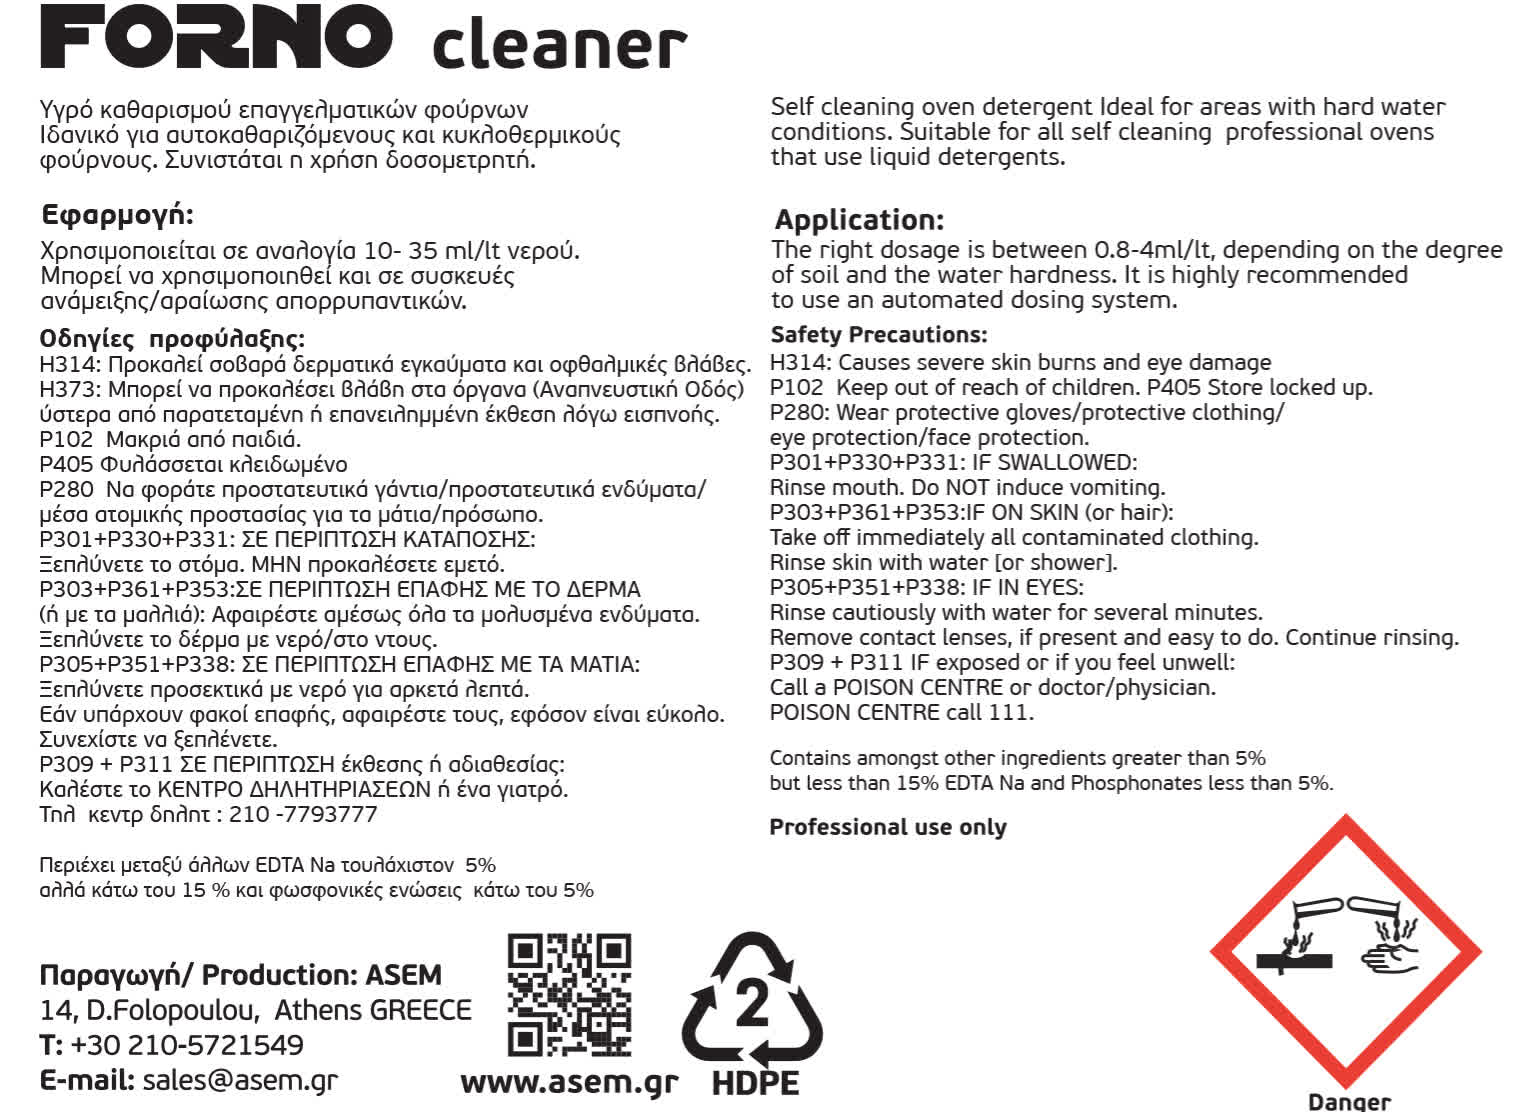 FORNO CLEANER